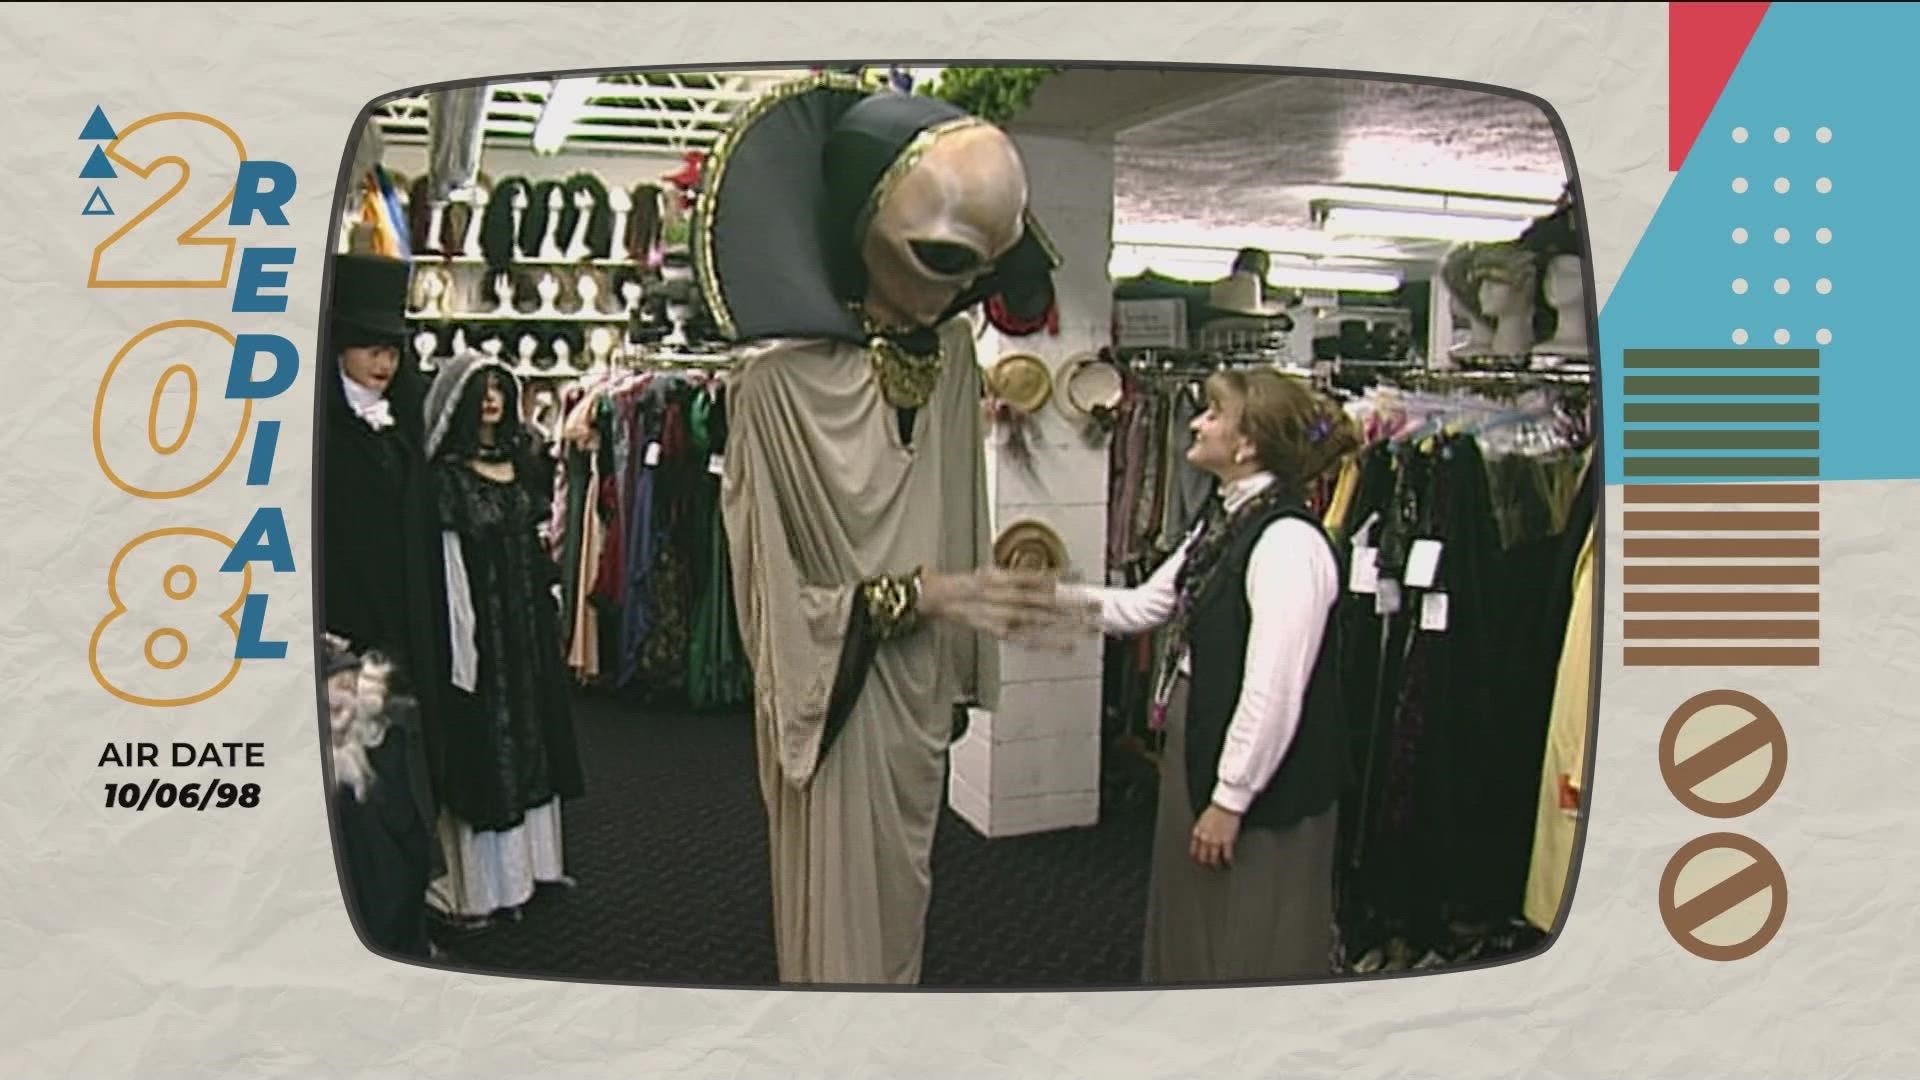 Idaho Life reporter John Miller traveled to a local costume shop to find out what the most-popular costumes were for Halloween in 1998.